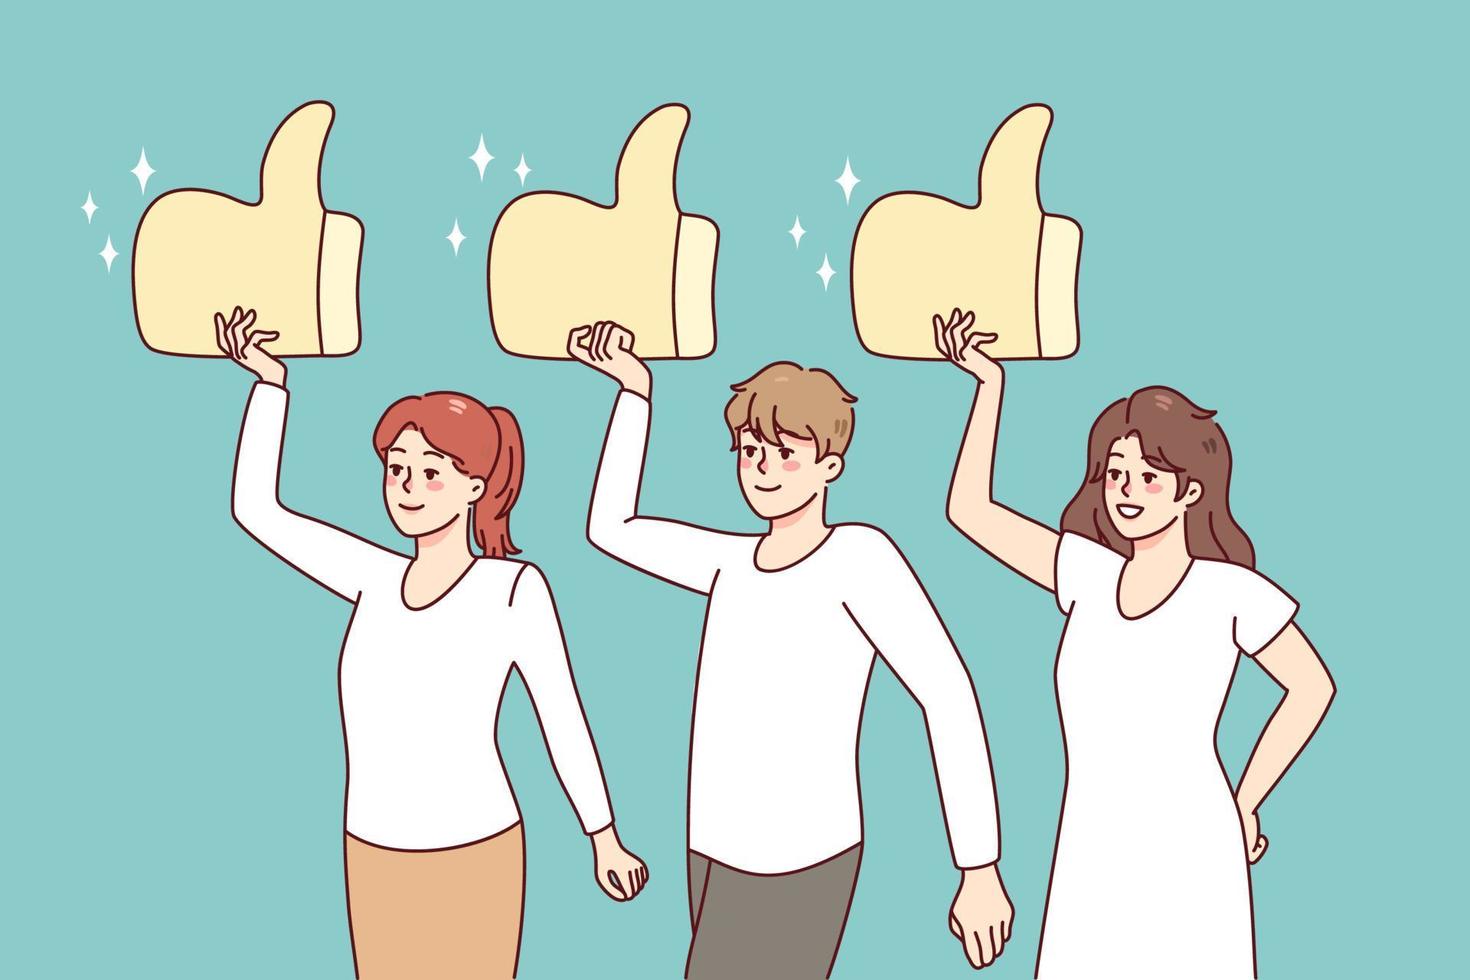 Diverse people holding huge like signs, giving good review to service. Clients or customers rate showing satisfaction. Feedback concept. Vector illustration.